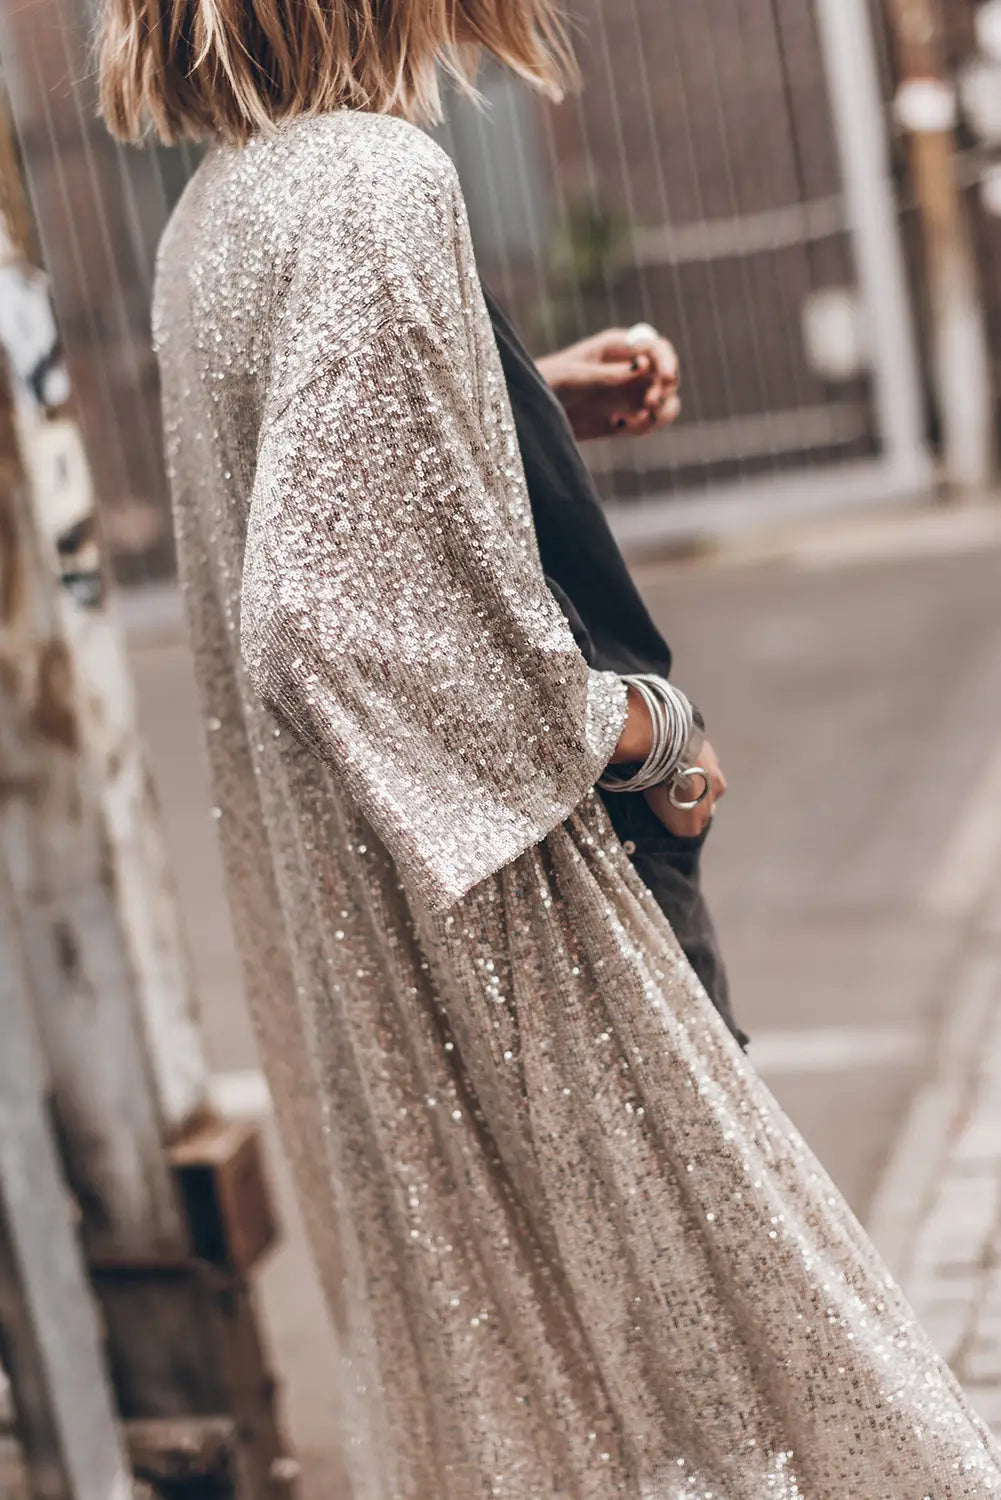 Apricot sequin 3/4 sleeve open front duster kimono